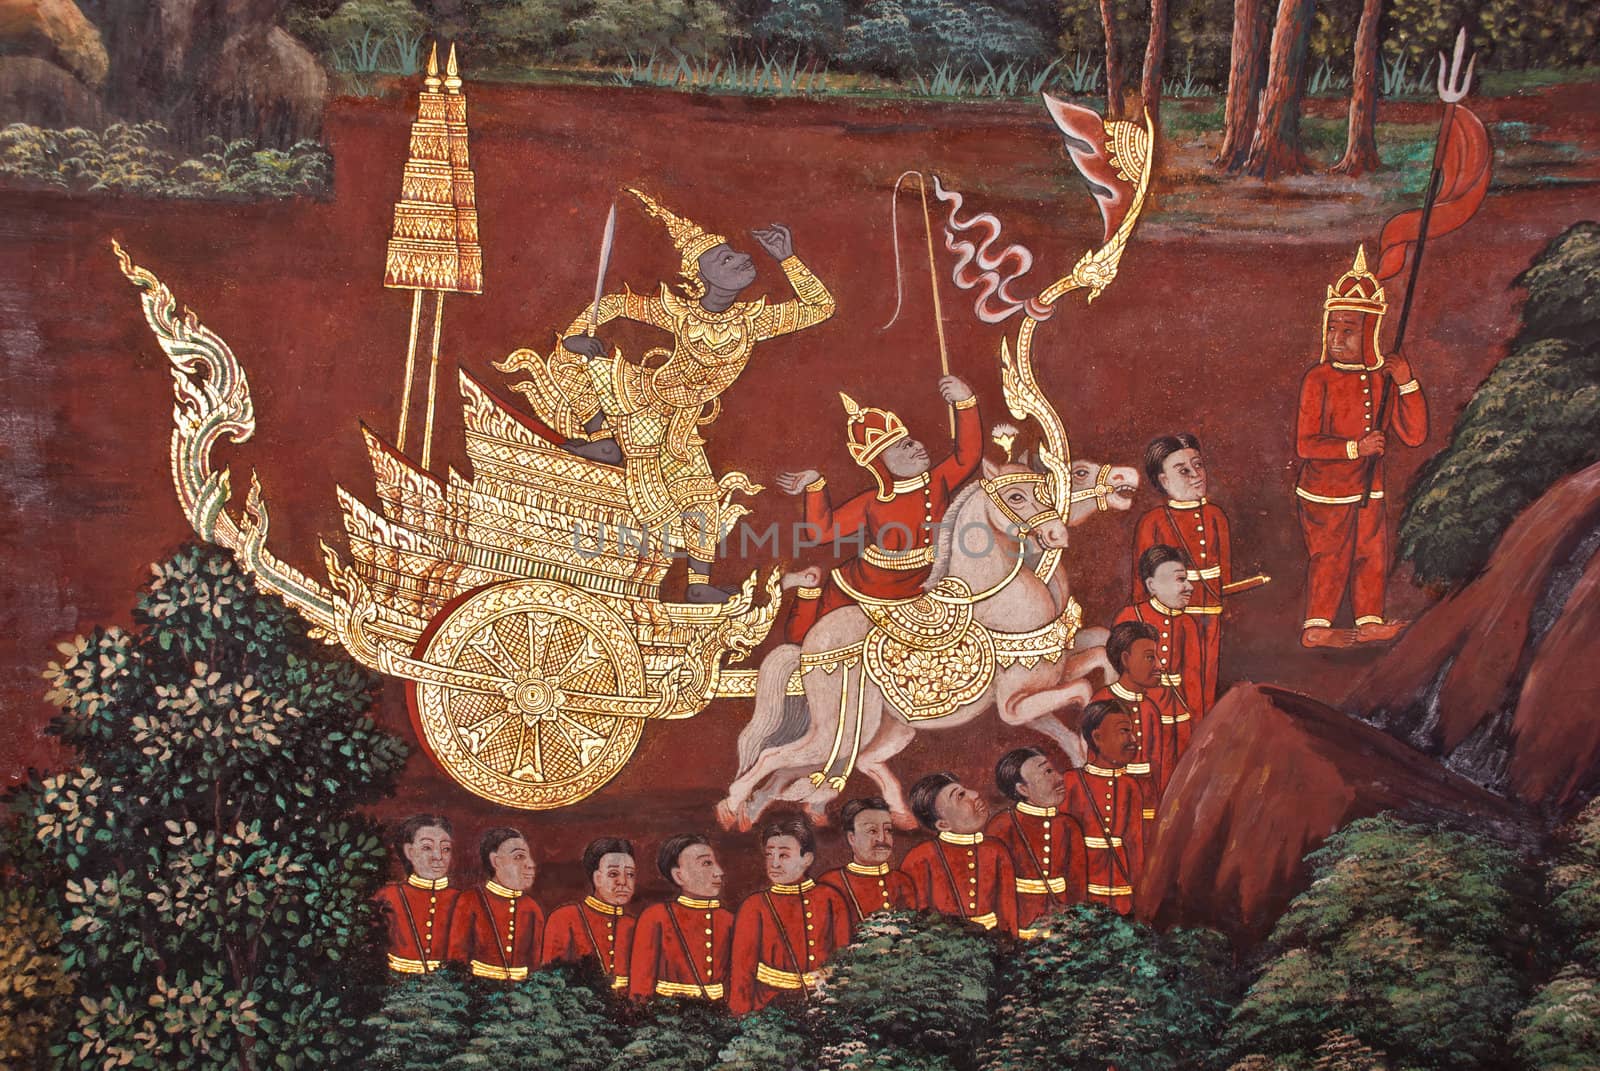 Thai temple mural by sasilsolutions